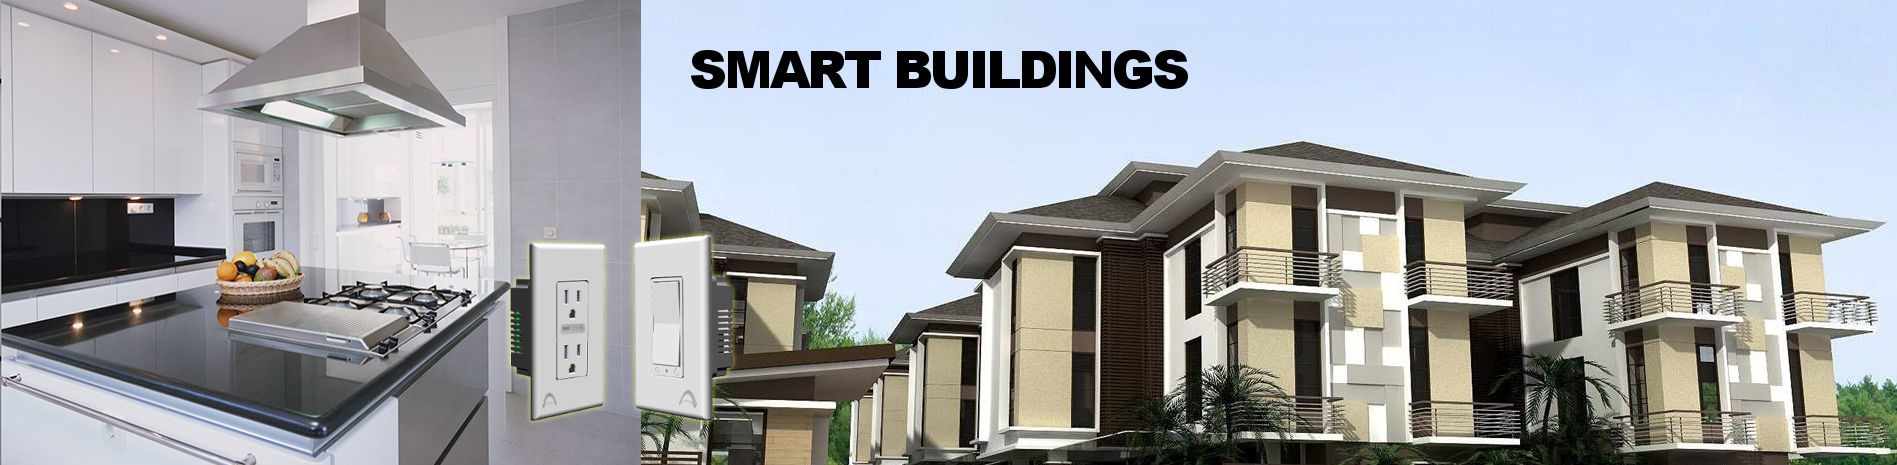 Smart Buildings by RPE.  New housing developments have the much to benefit from Internet of Everything solutions.